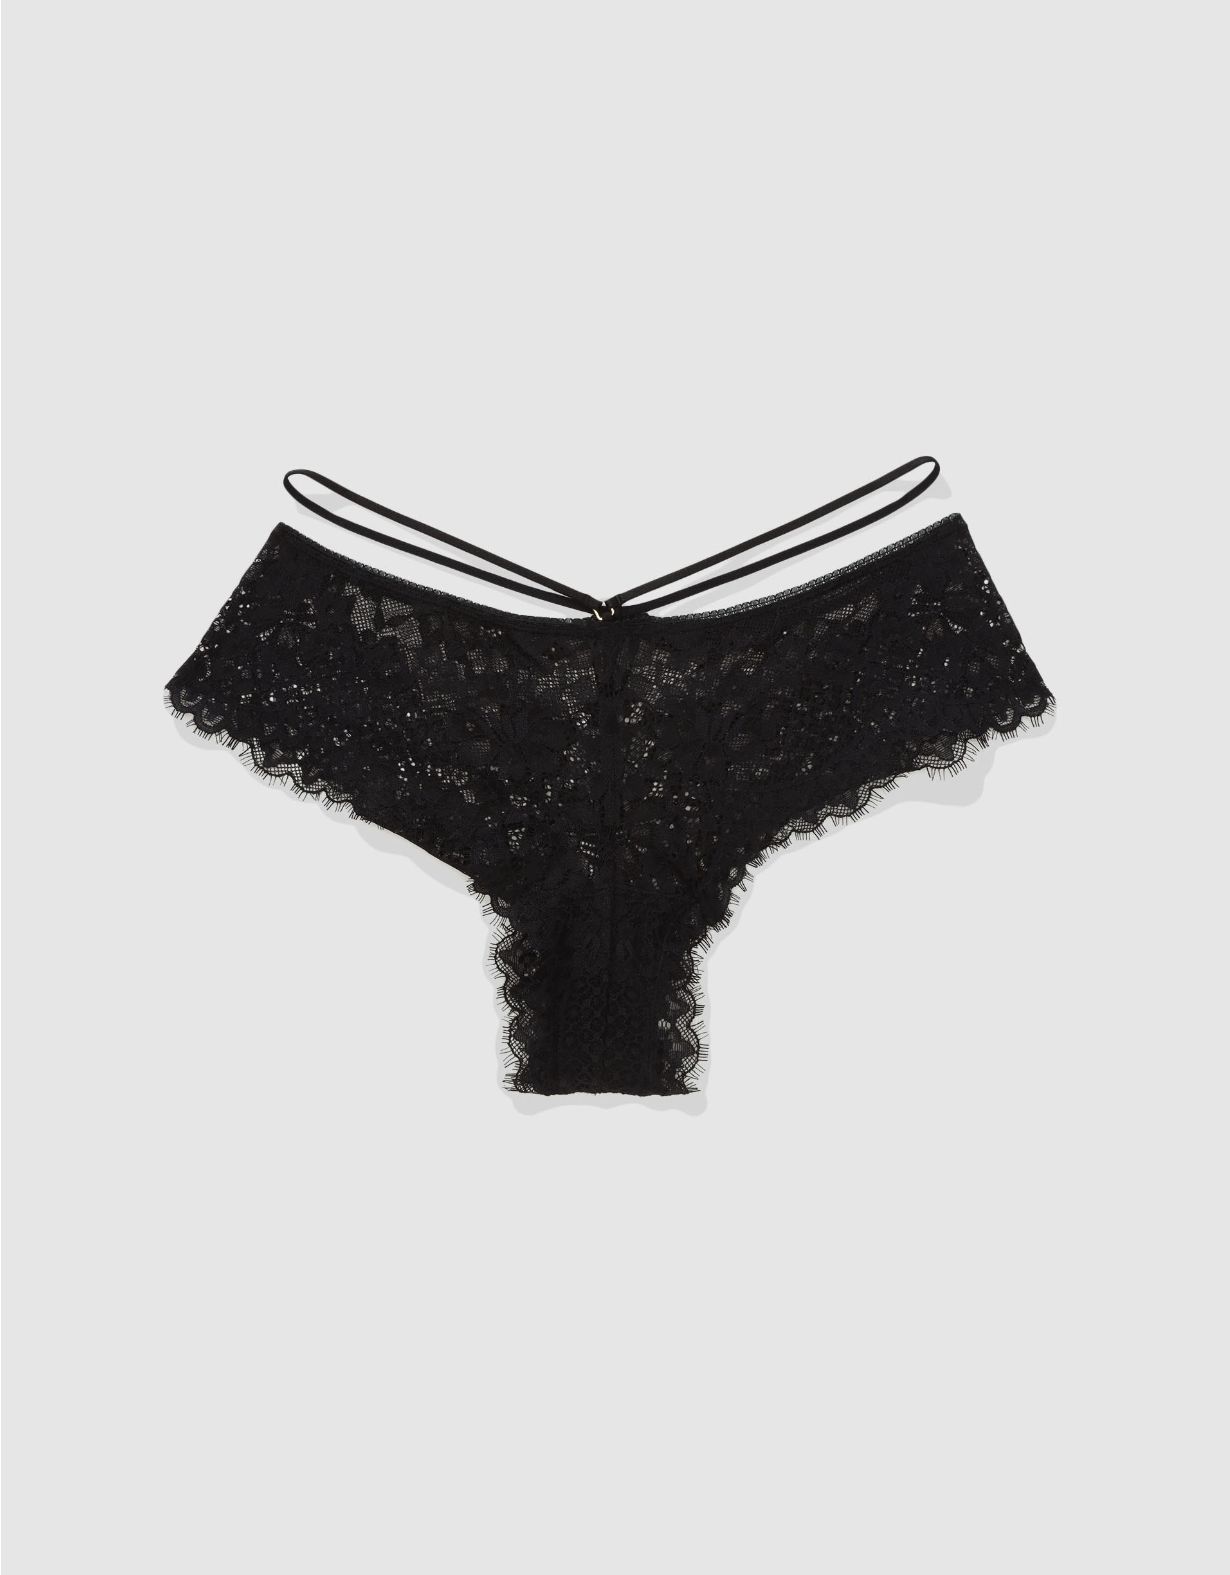 Show Off Lace Low Rise Cheeky Underwear